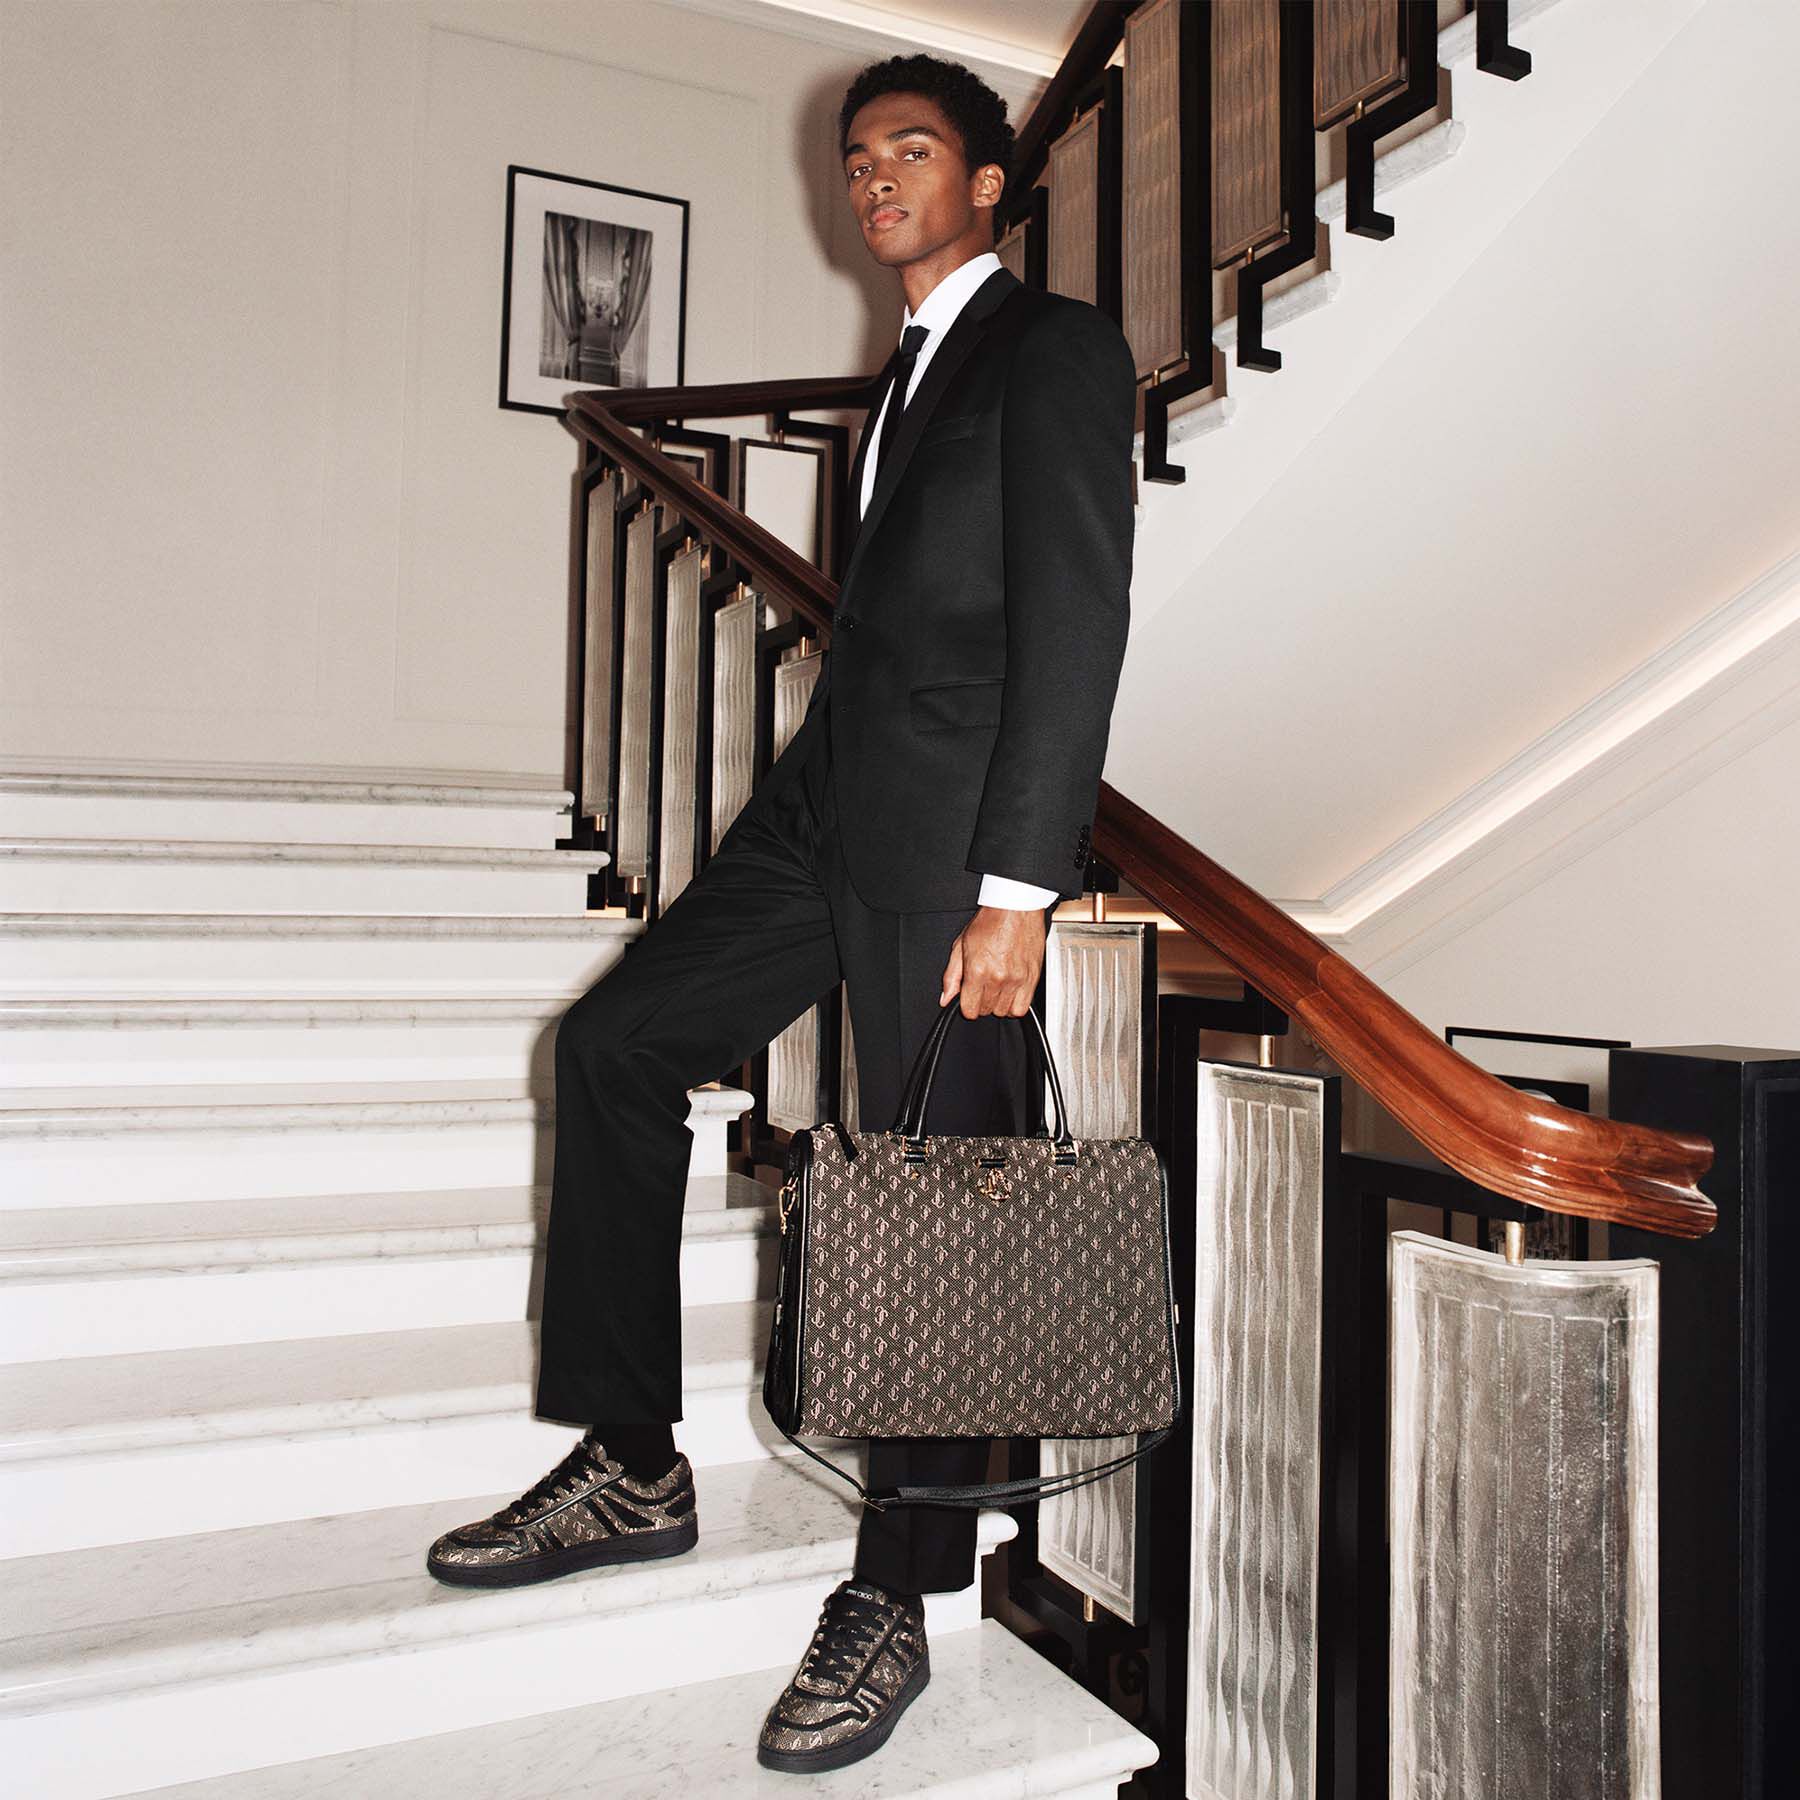 Louis Vuitton Men's S/S 20 Touches Down with Campaign and